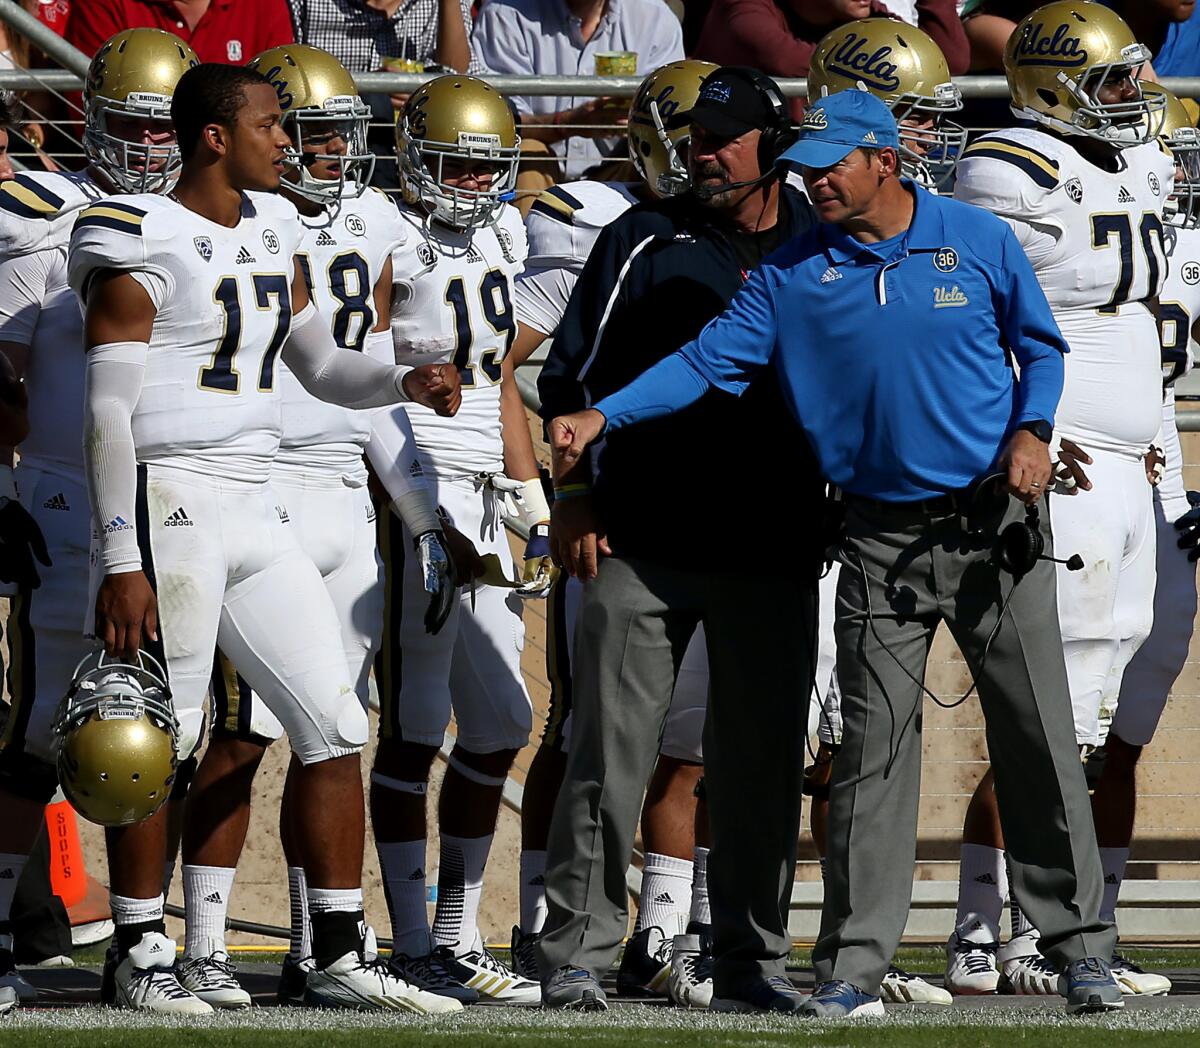 UCLA Coach Jim Mora tries to pump up quarterback Brett Hundley in the third quarter of a game against Stanford in October 2013. The Bruins lost that contest, 24-10.